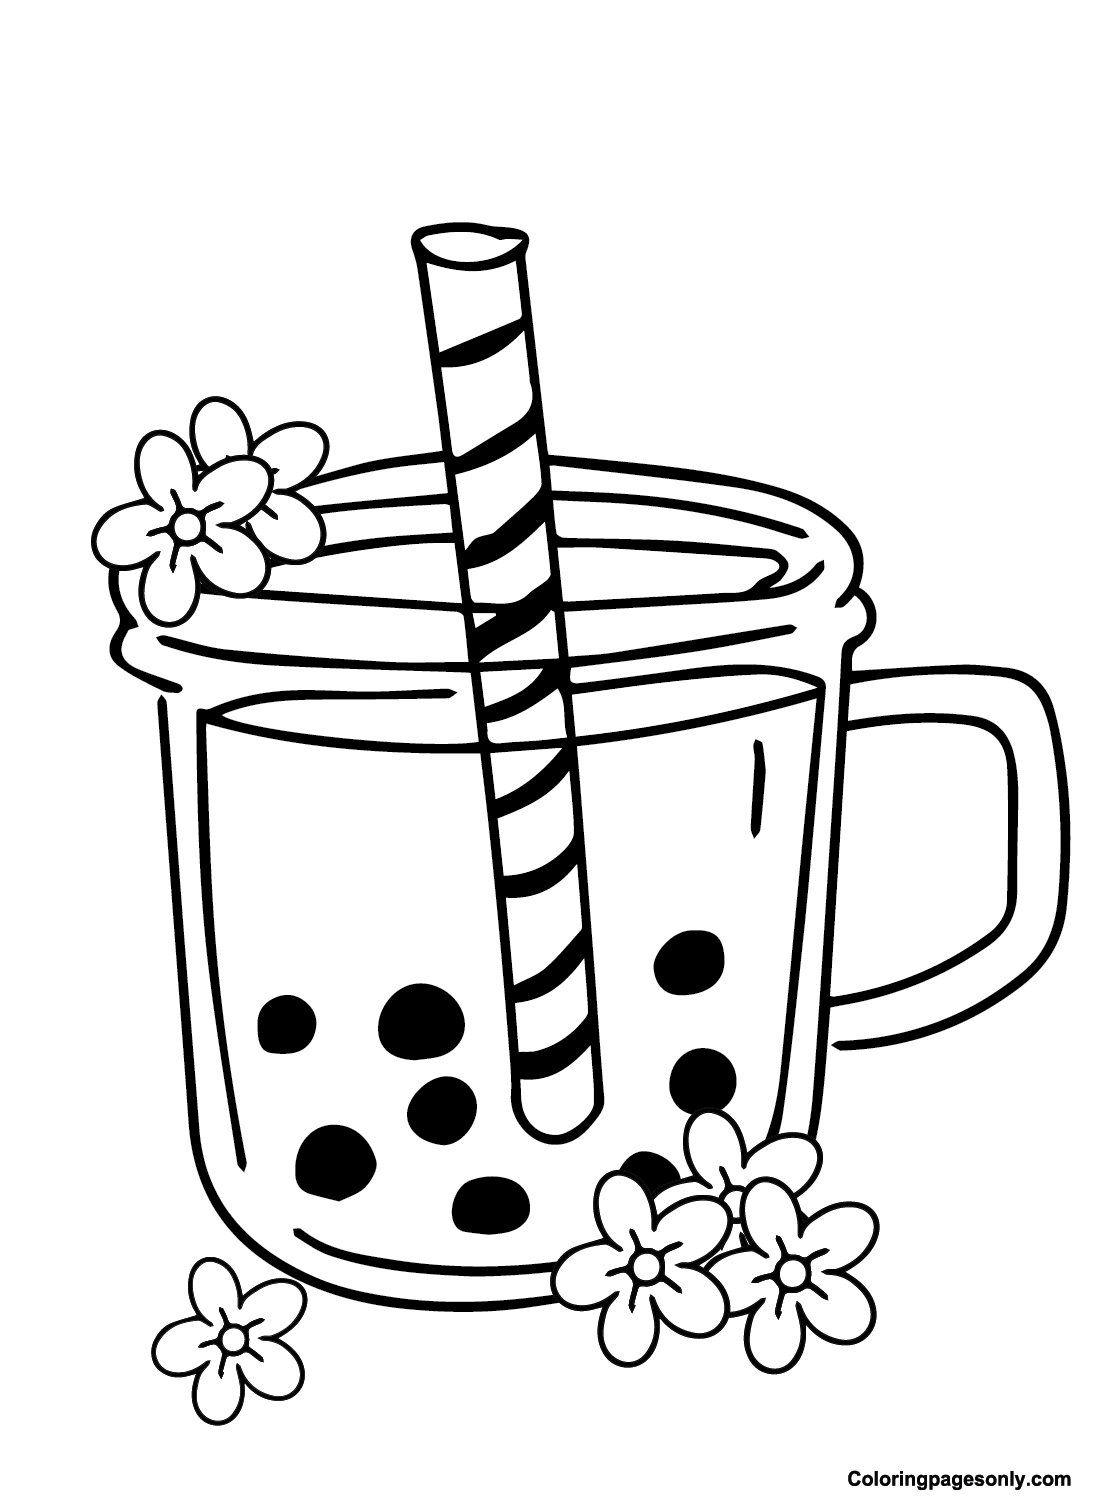 Boba Tea Coloring Pages Printable For Free Download 